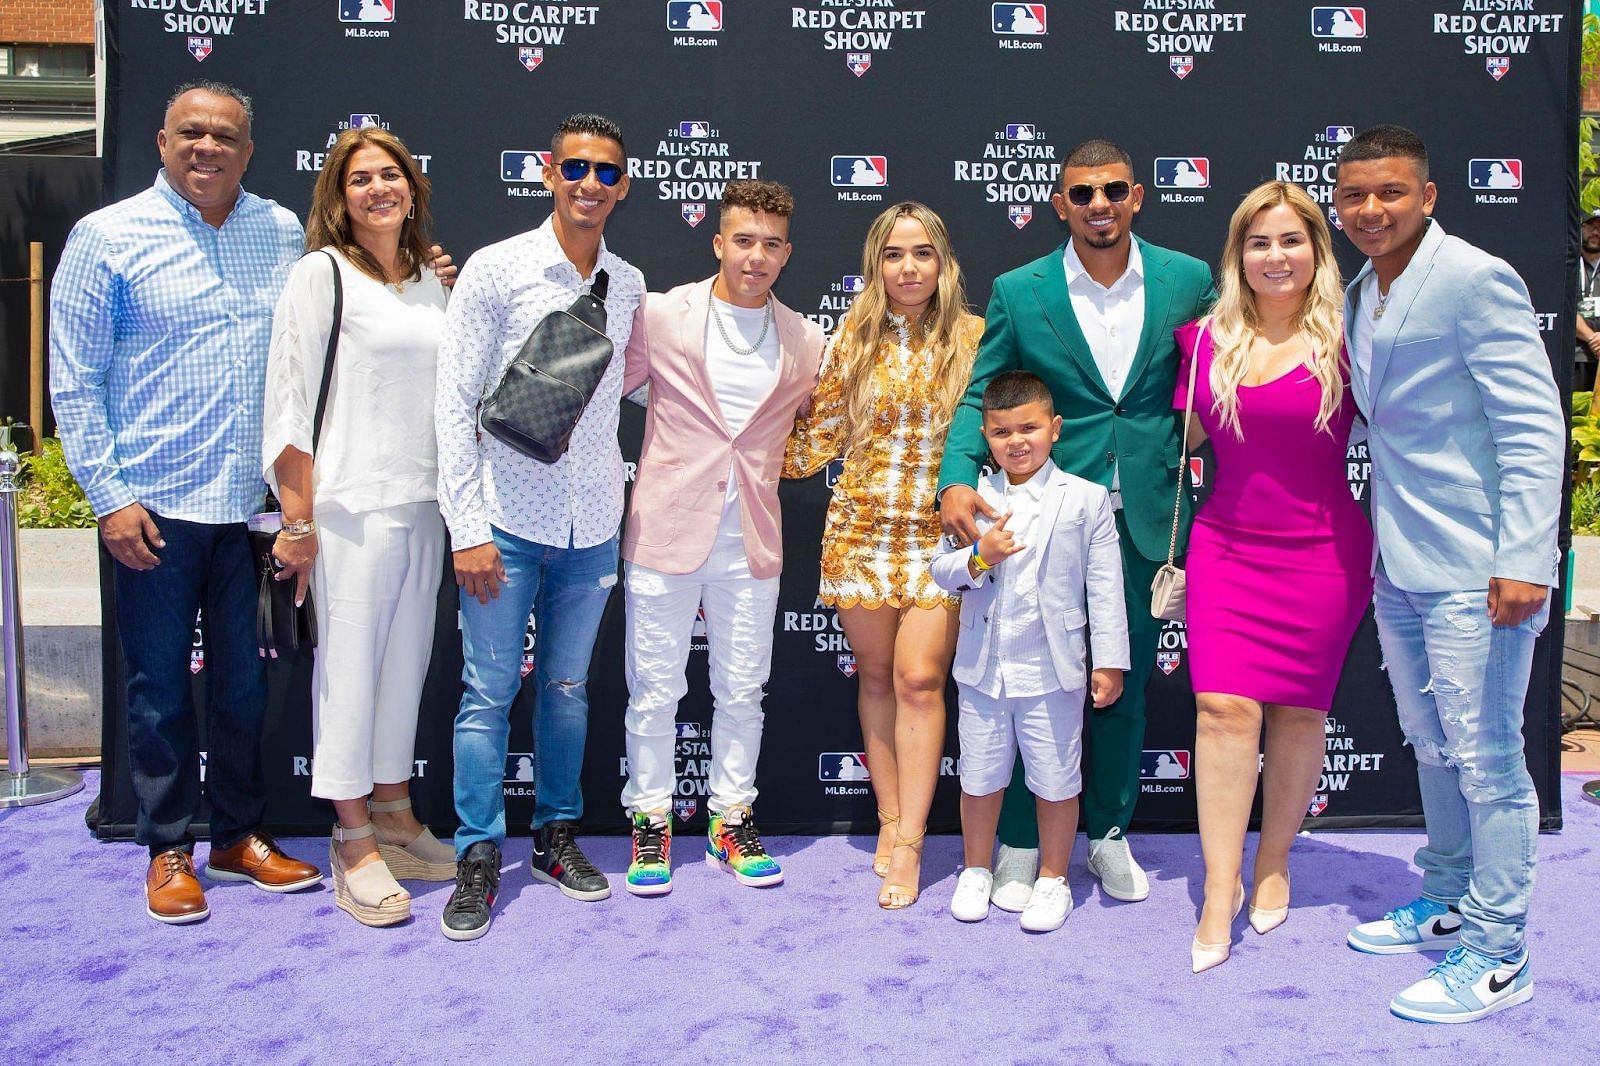 Eduardo Escobar with his wife and family. Source: Getty Images